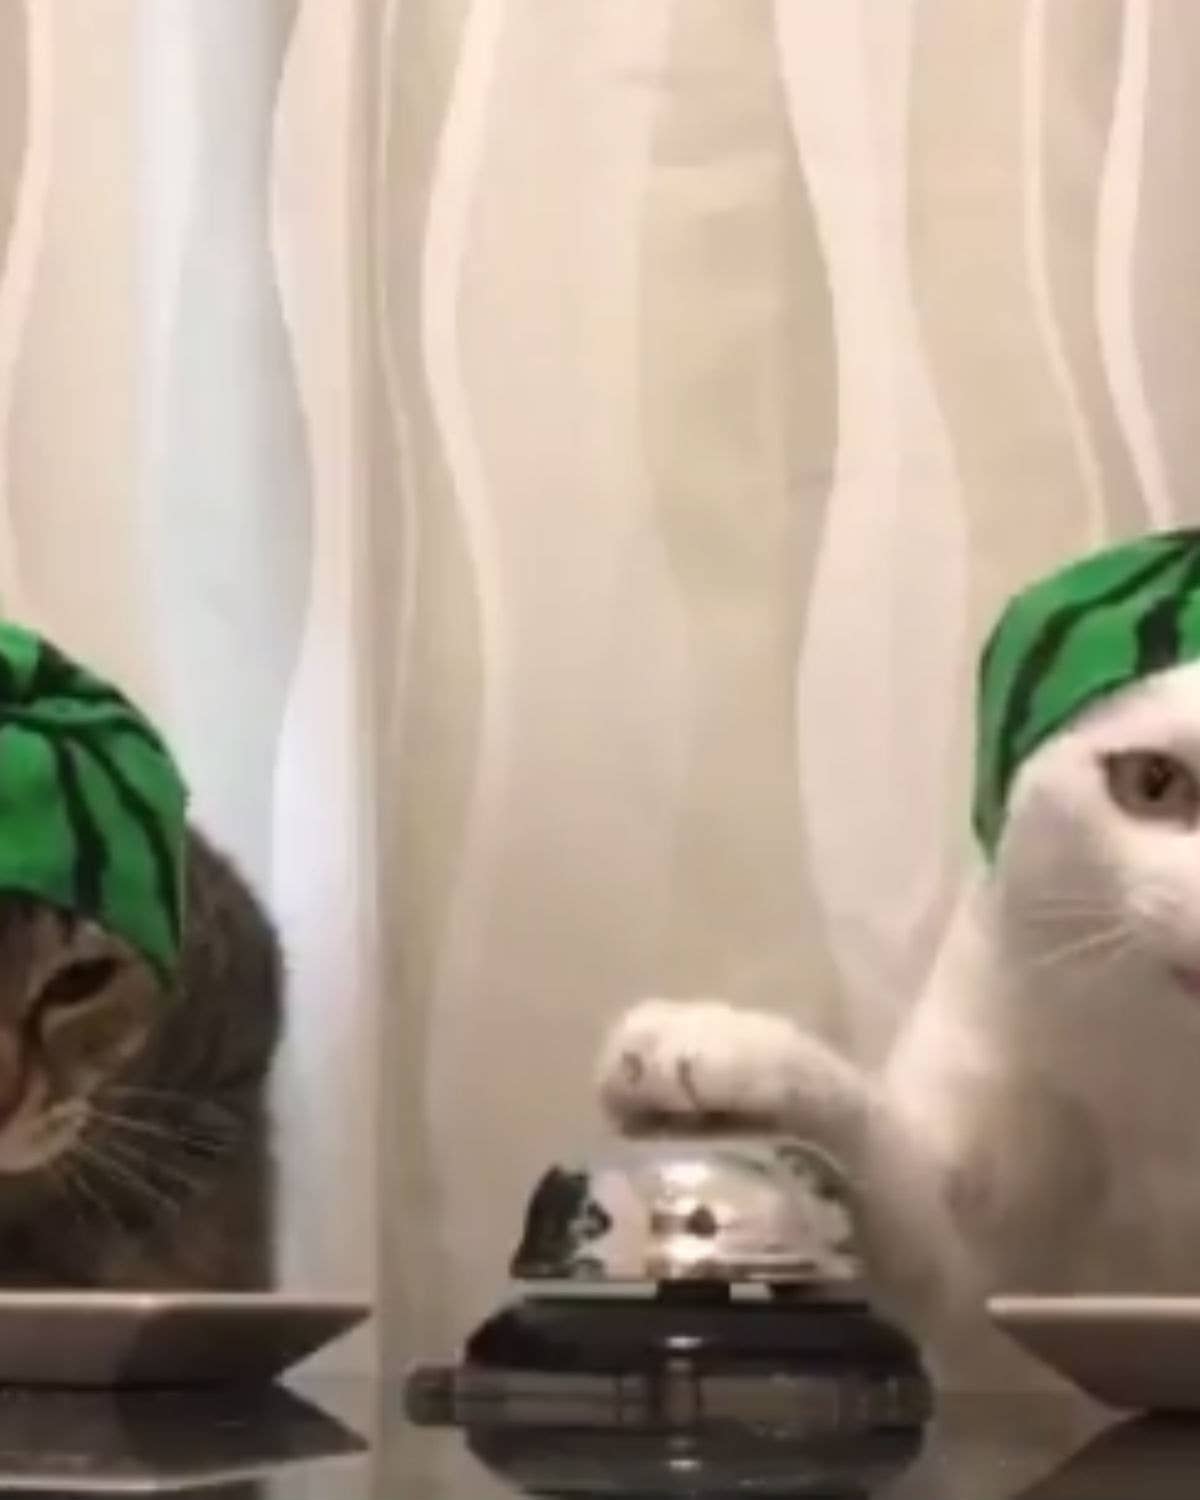 Watch These Adorable Fruit-Hat-Wearing Cats Ring Bells For Food